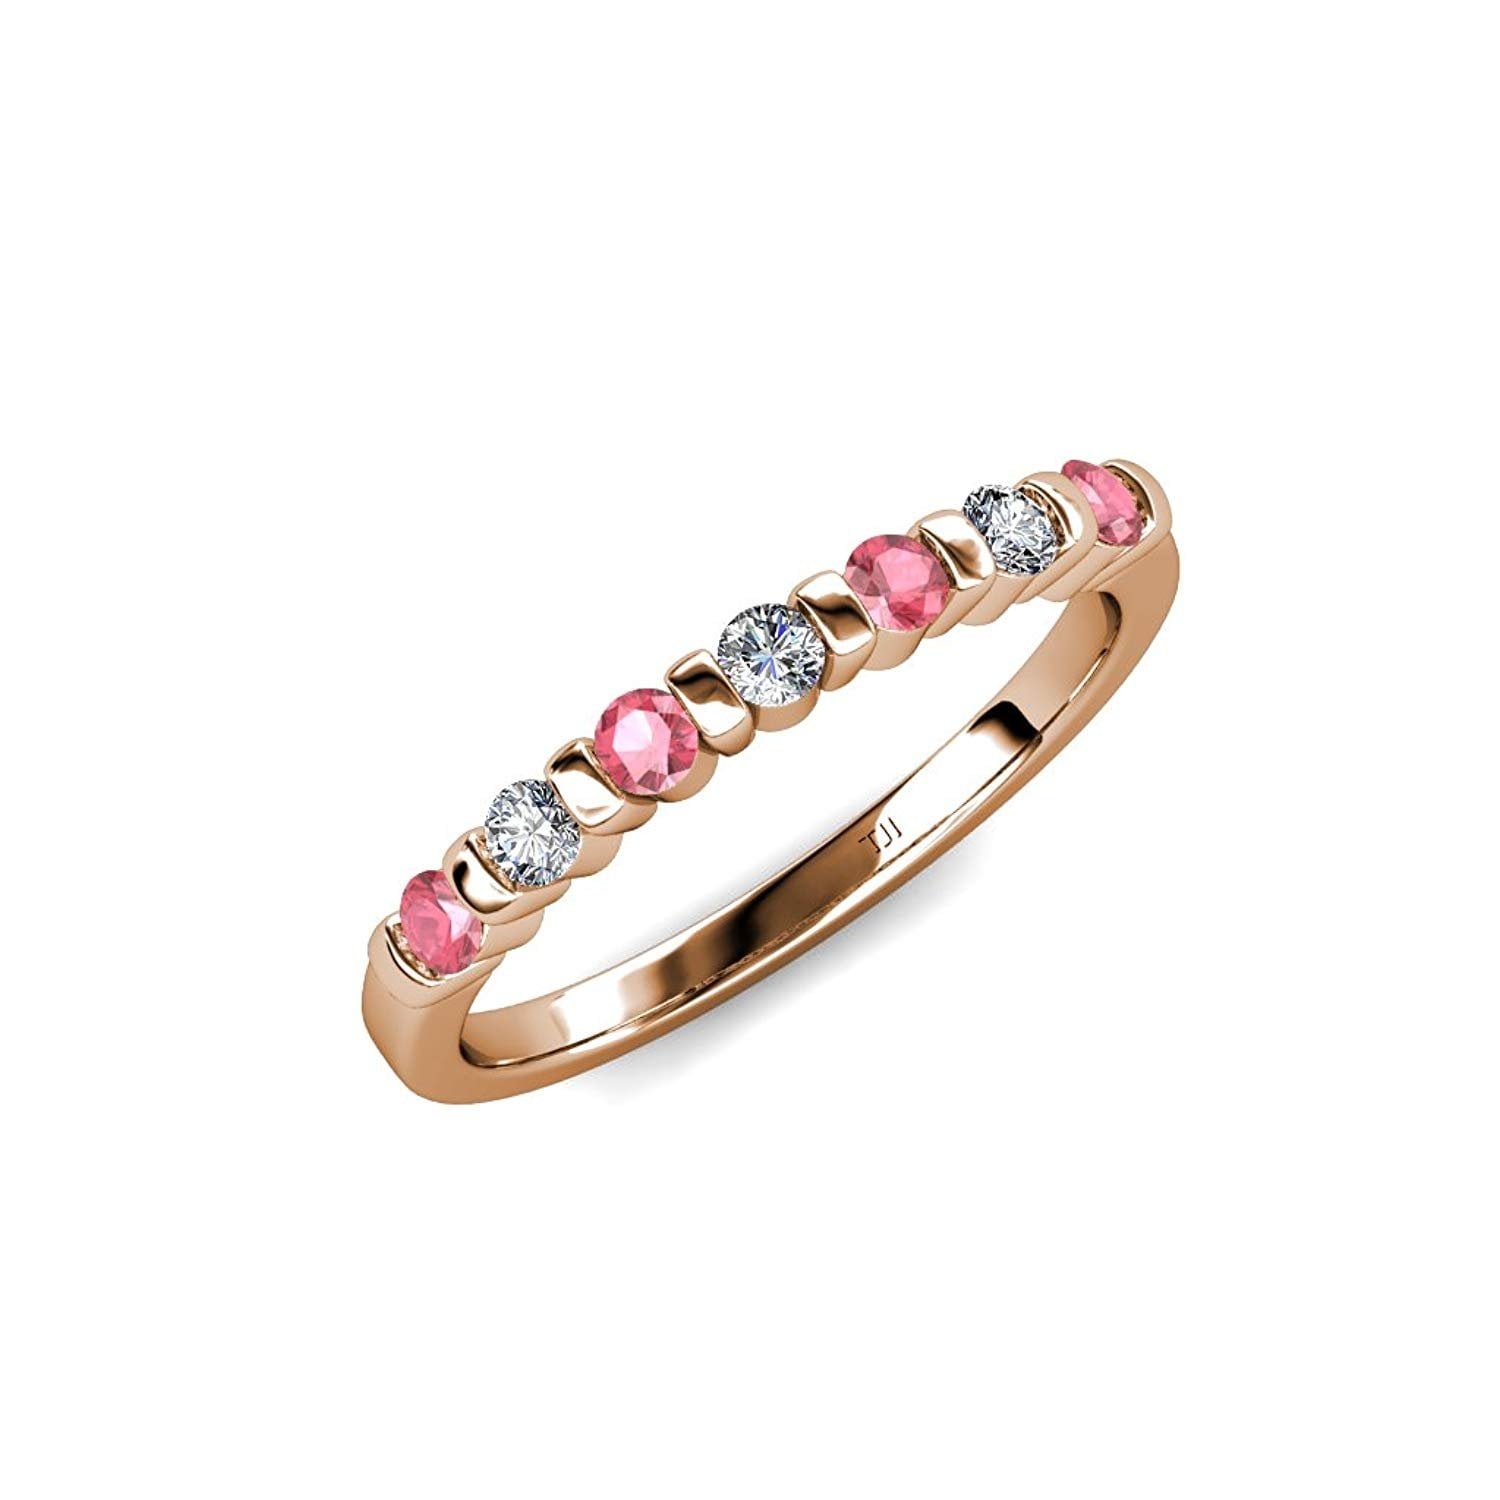 Pink Tourmaline and Diamond 7 Stone Wedding Band 0.22 ct tw in 14K Rose Gold.size 8